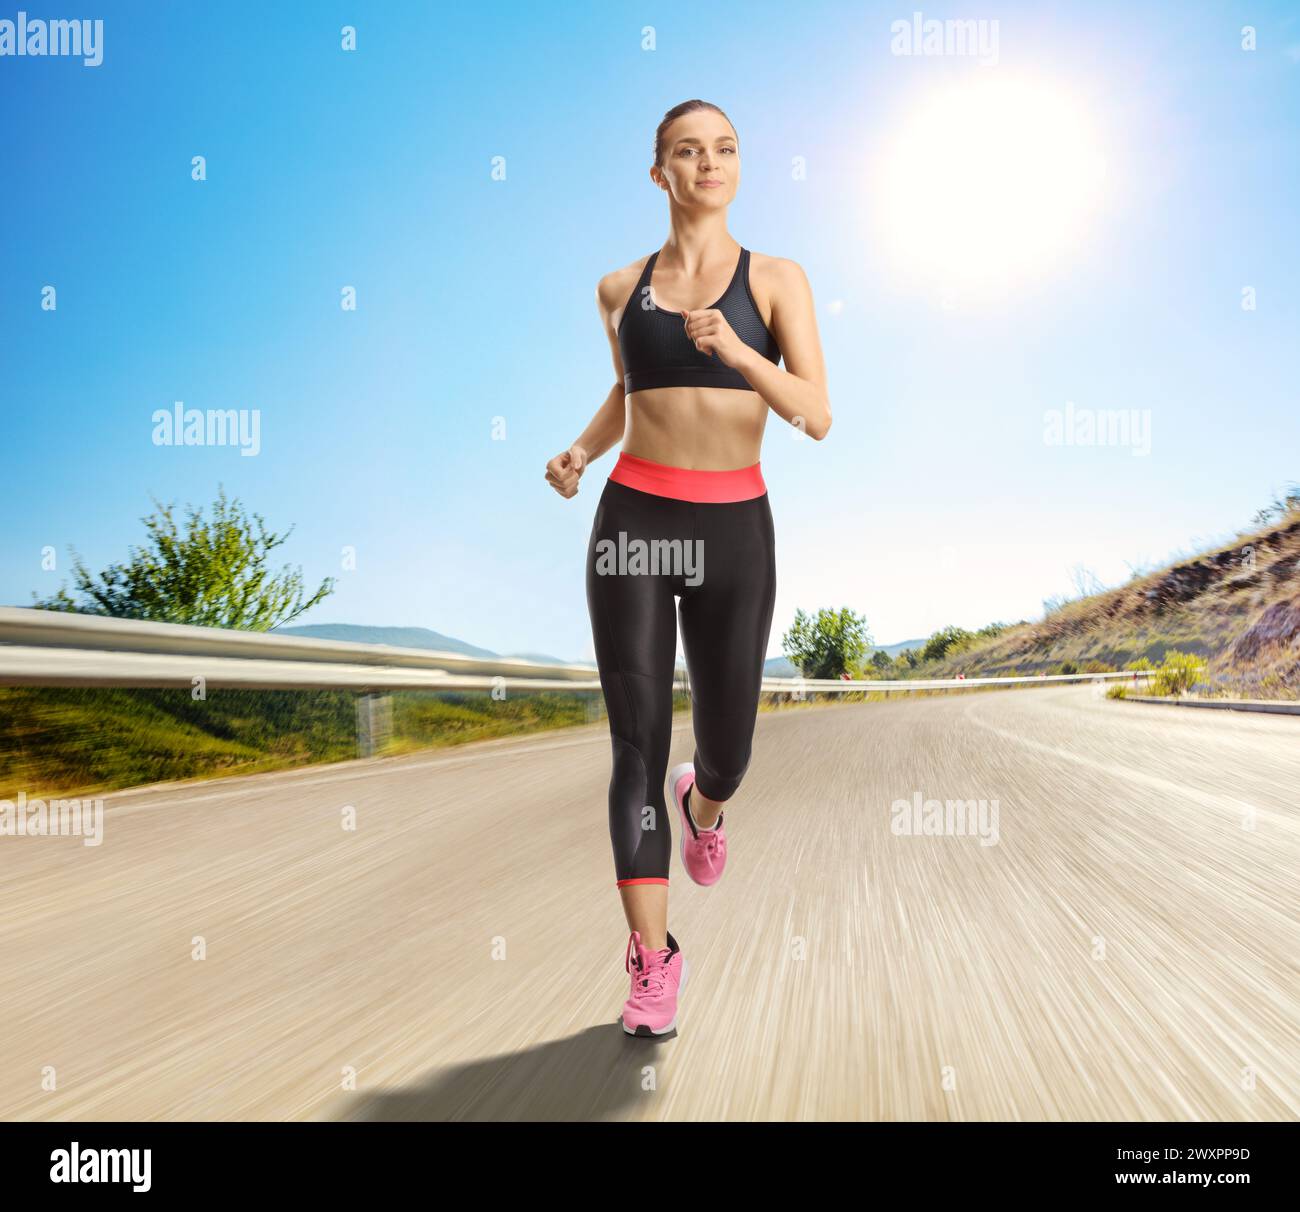 Young fit woman running on an open road on a sunny day Stock Photo